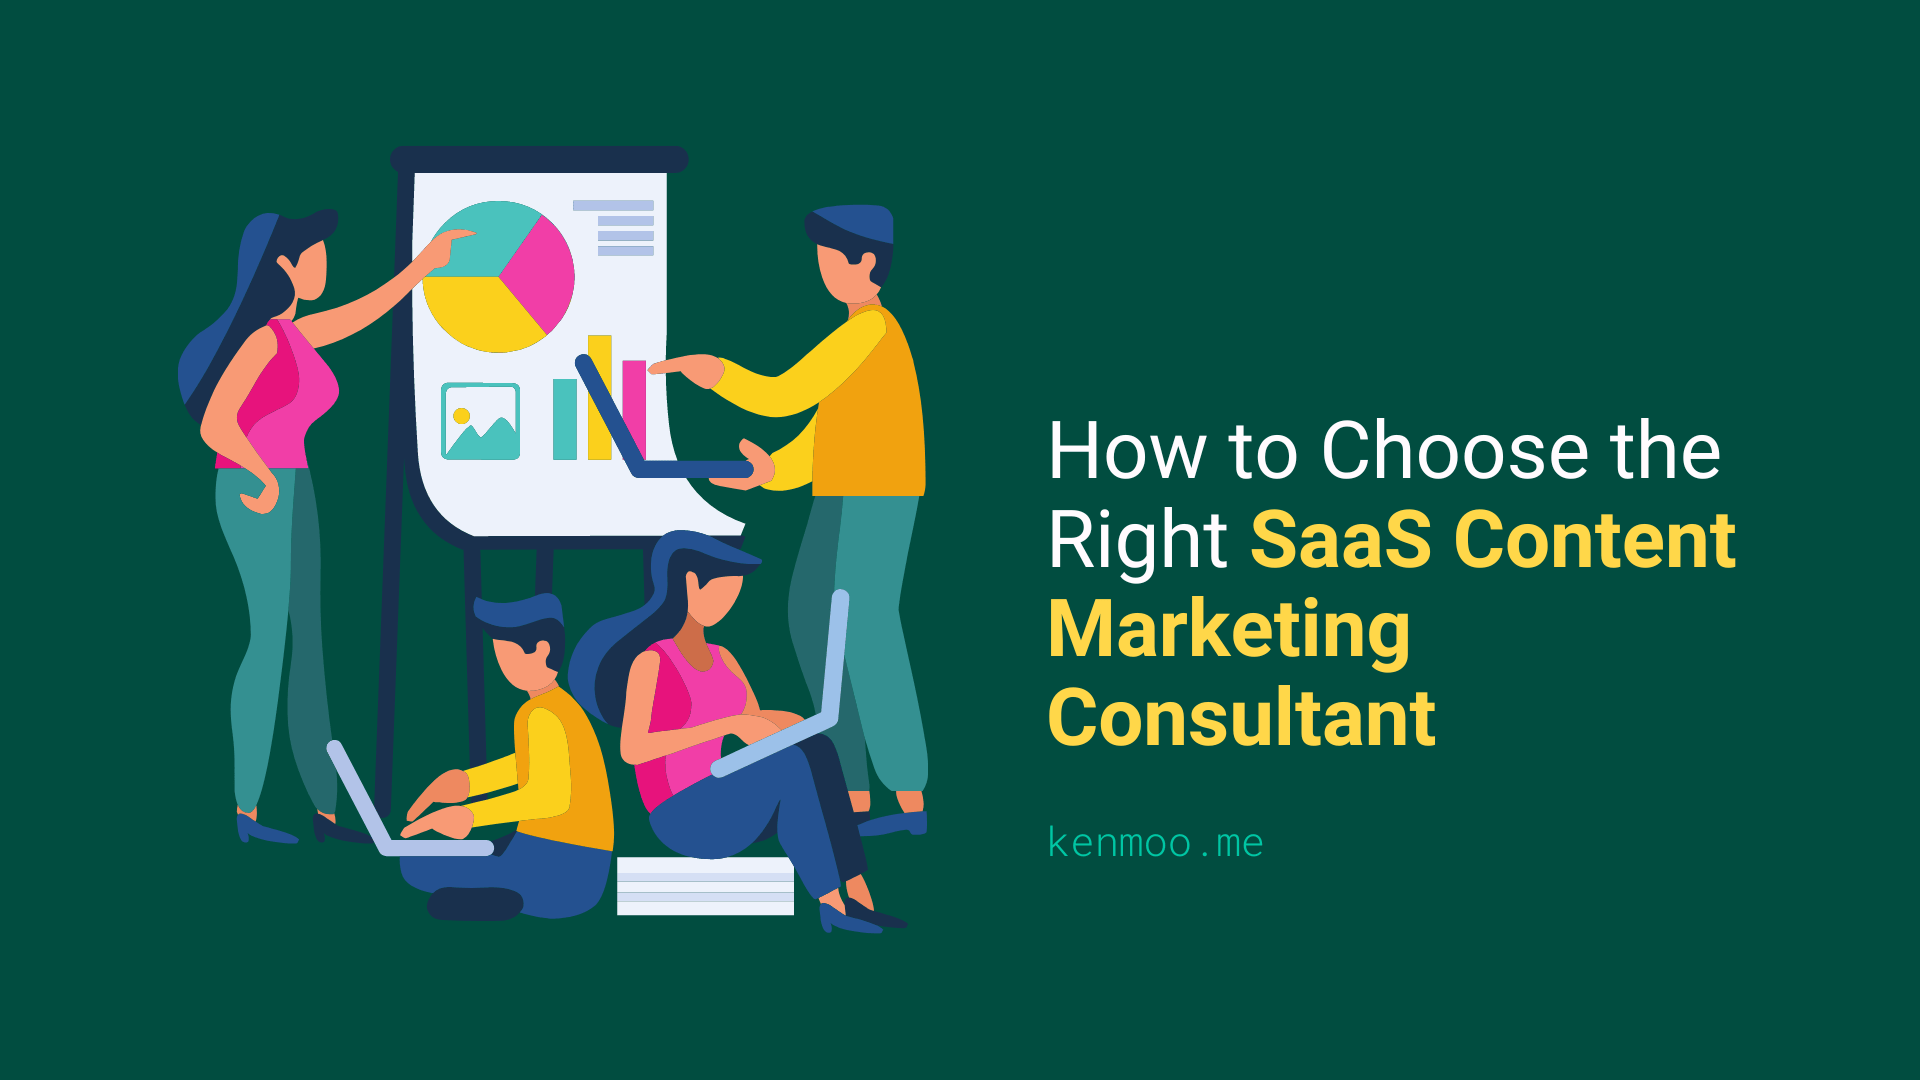 How to Choose the Right SaaS Content Marketing Consultant